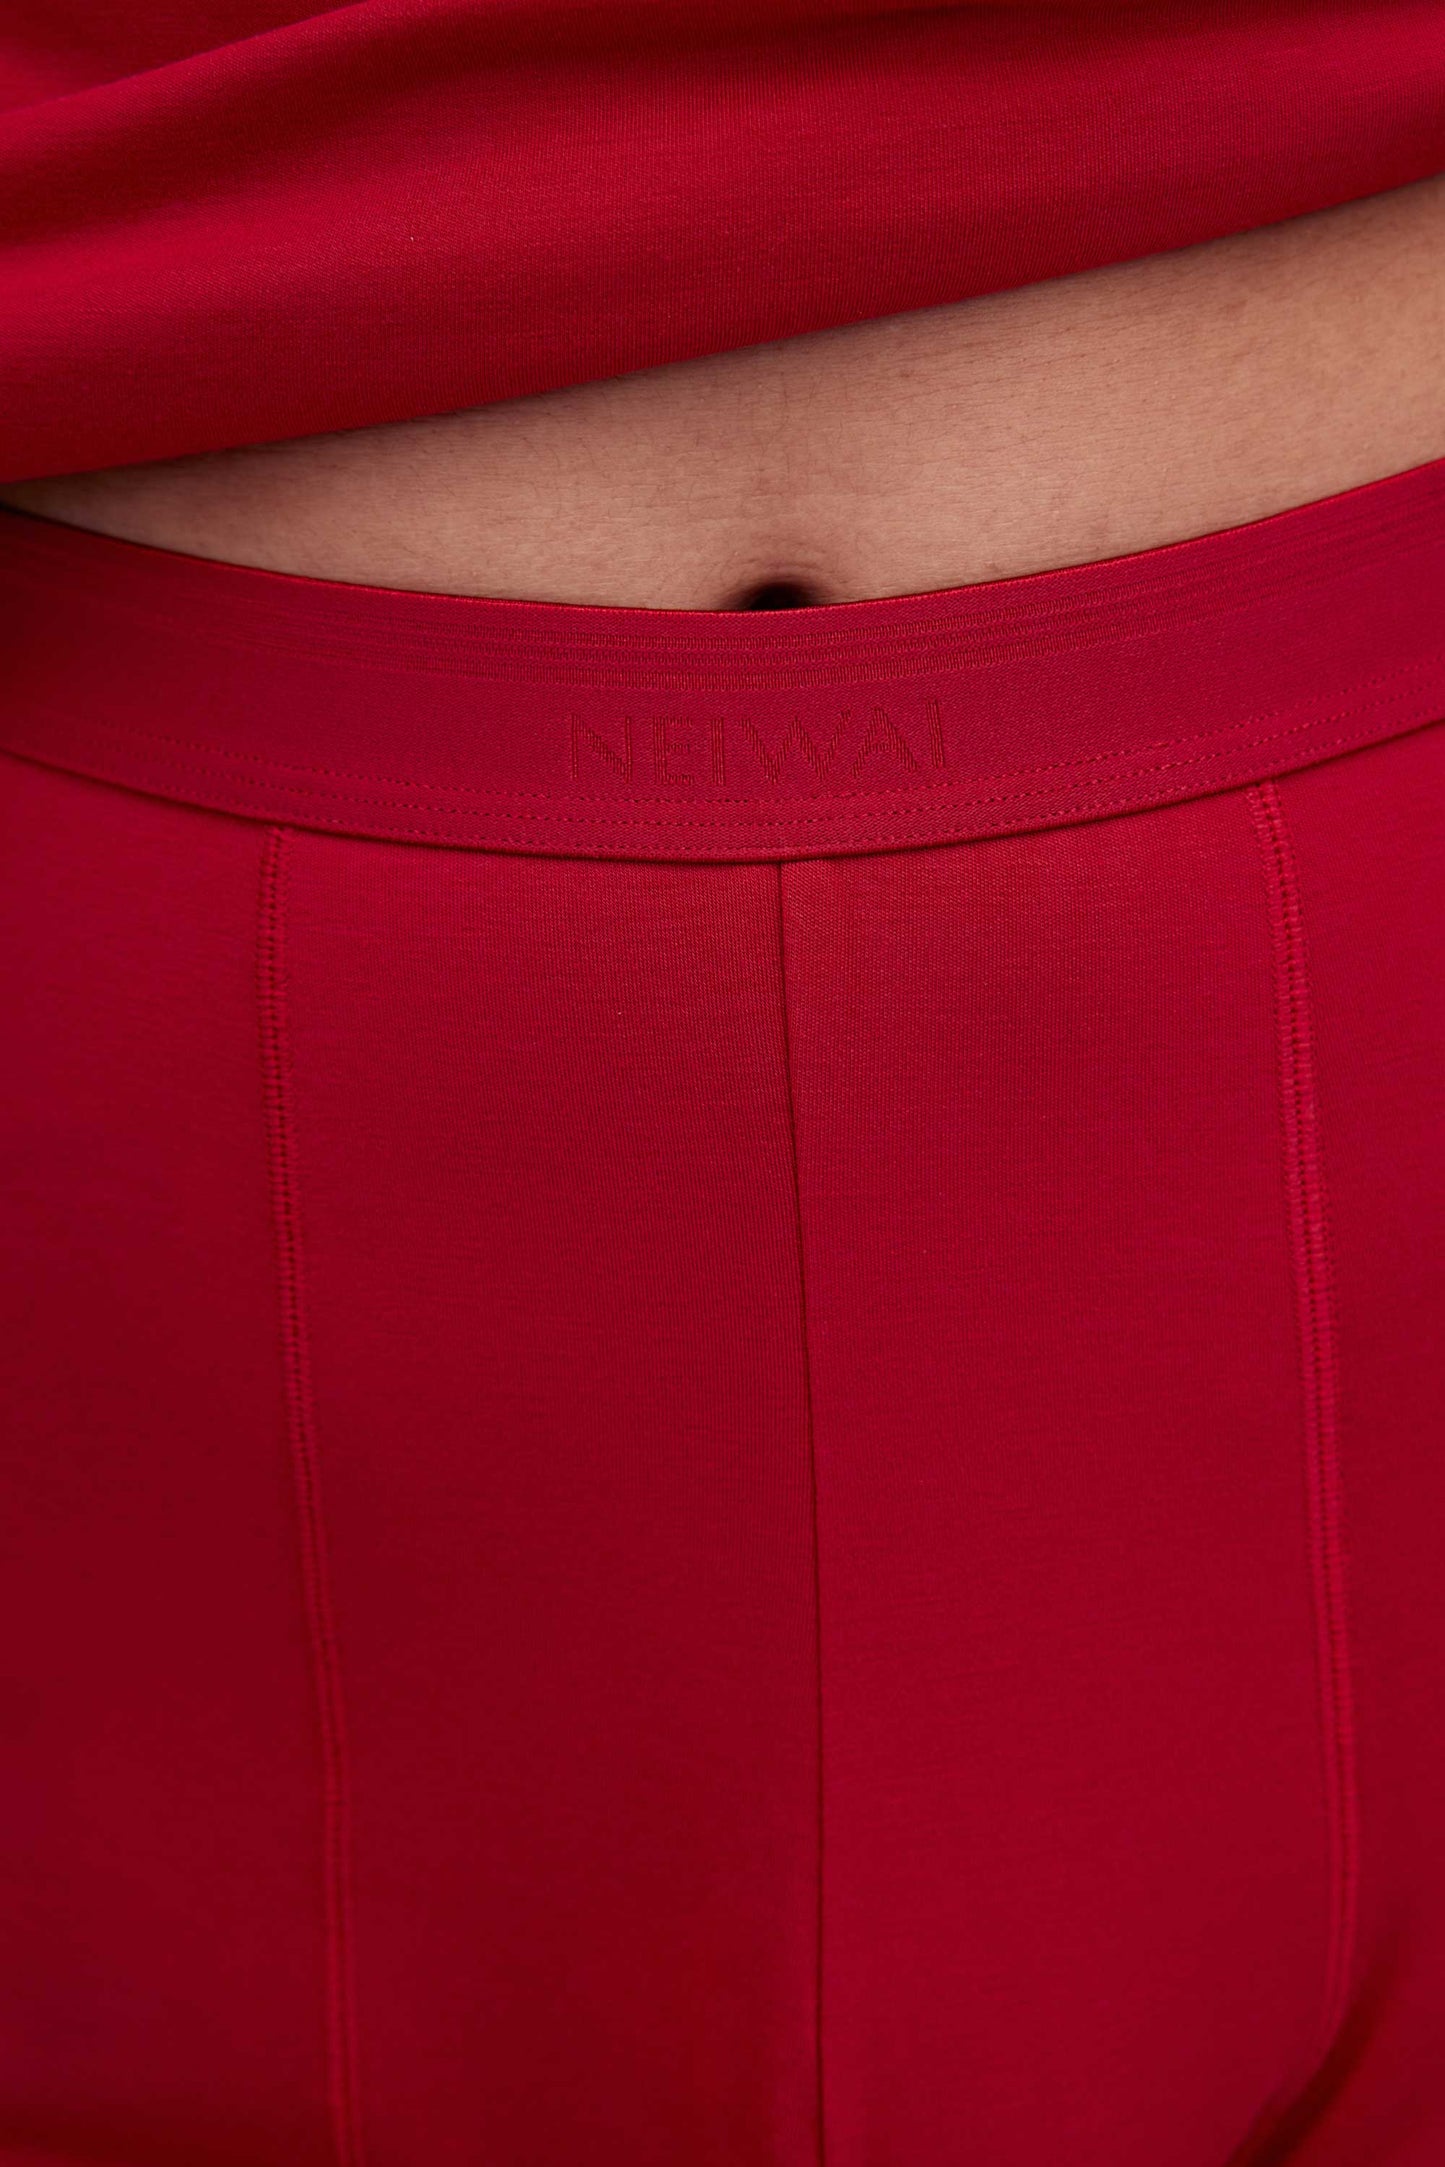 The red thermal pants have the NEIWAI logo printed on the waist band.